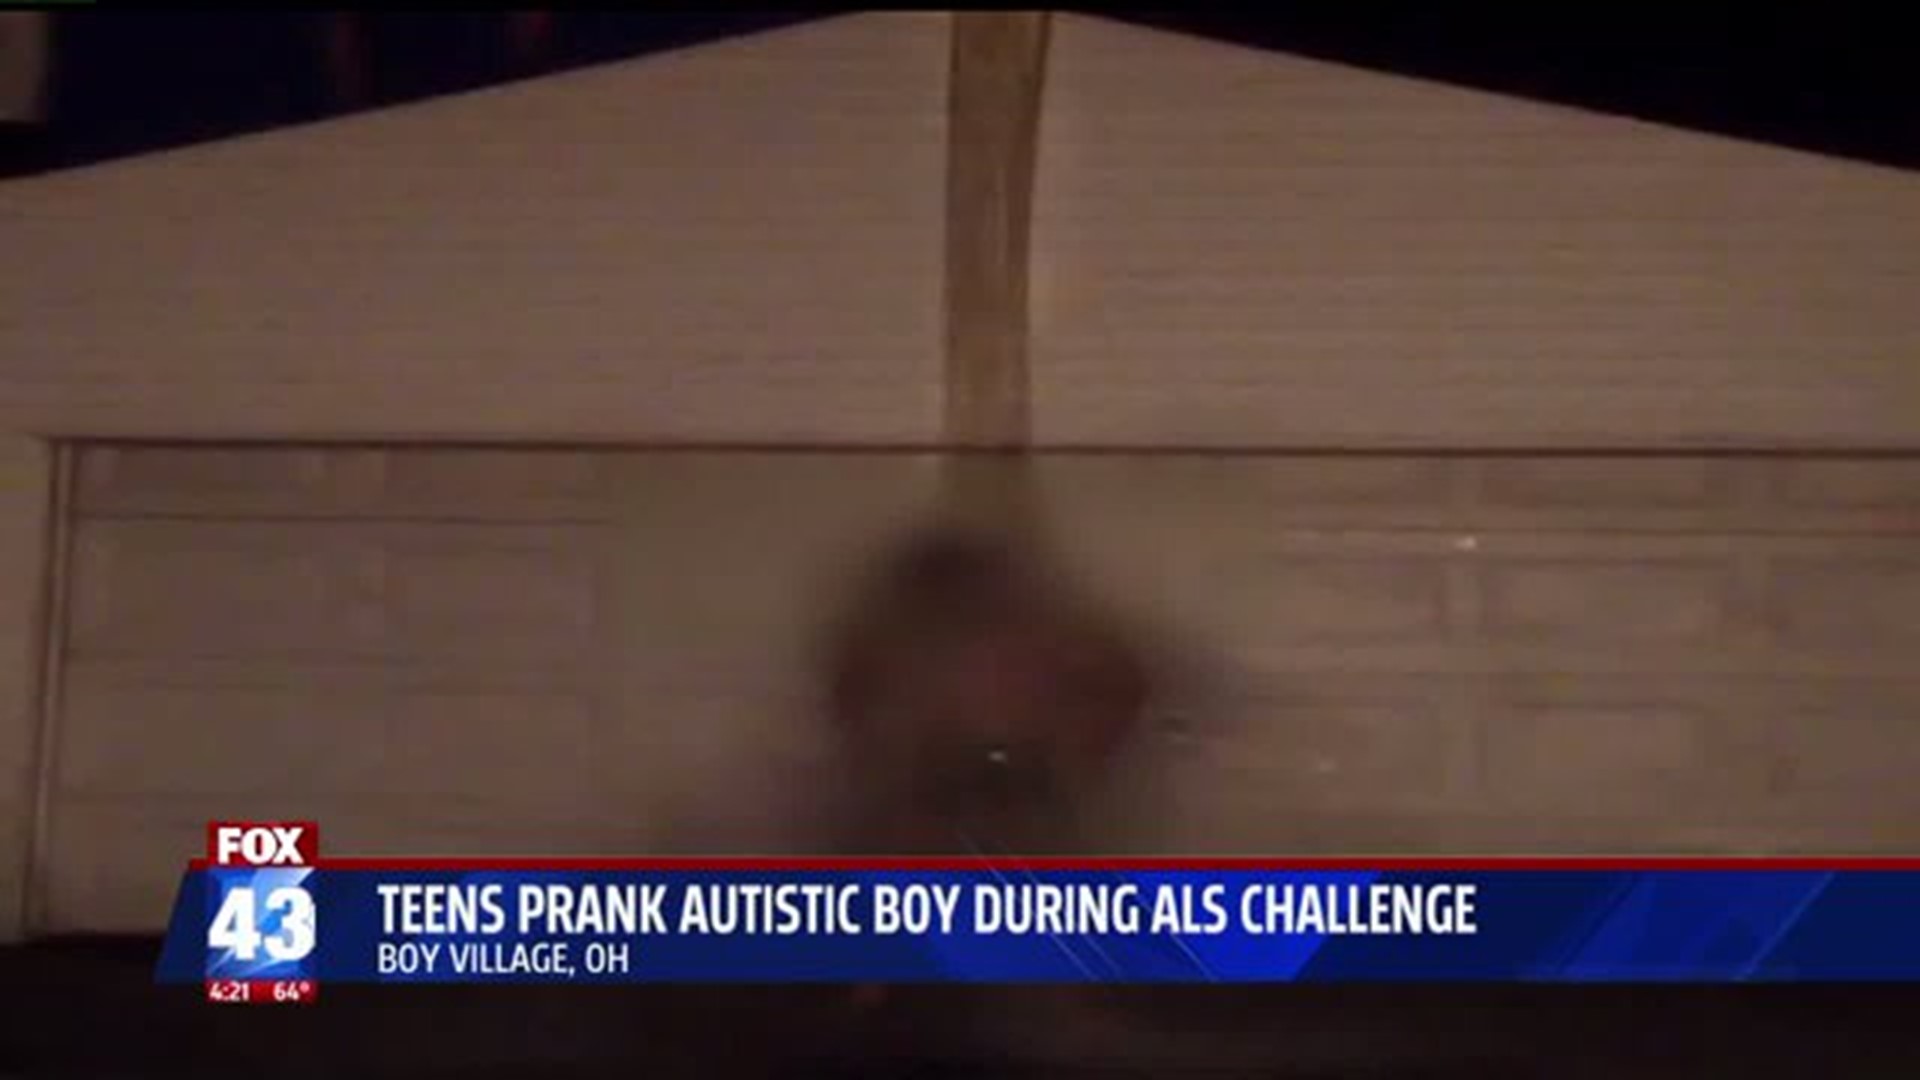 Mom says an "Ice Bucket Challenge" turned cruel prank drenching autistic son with bodily fluids